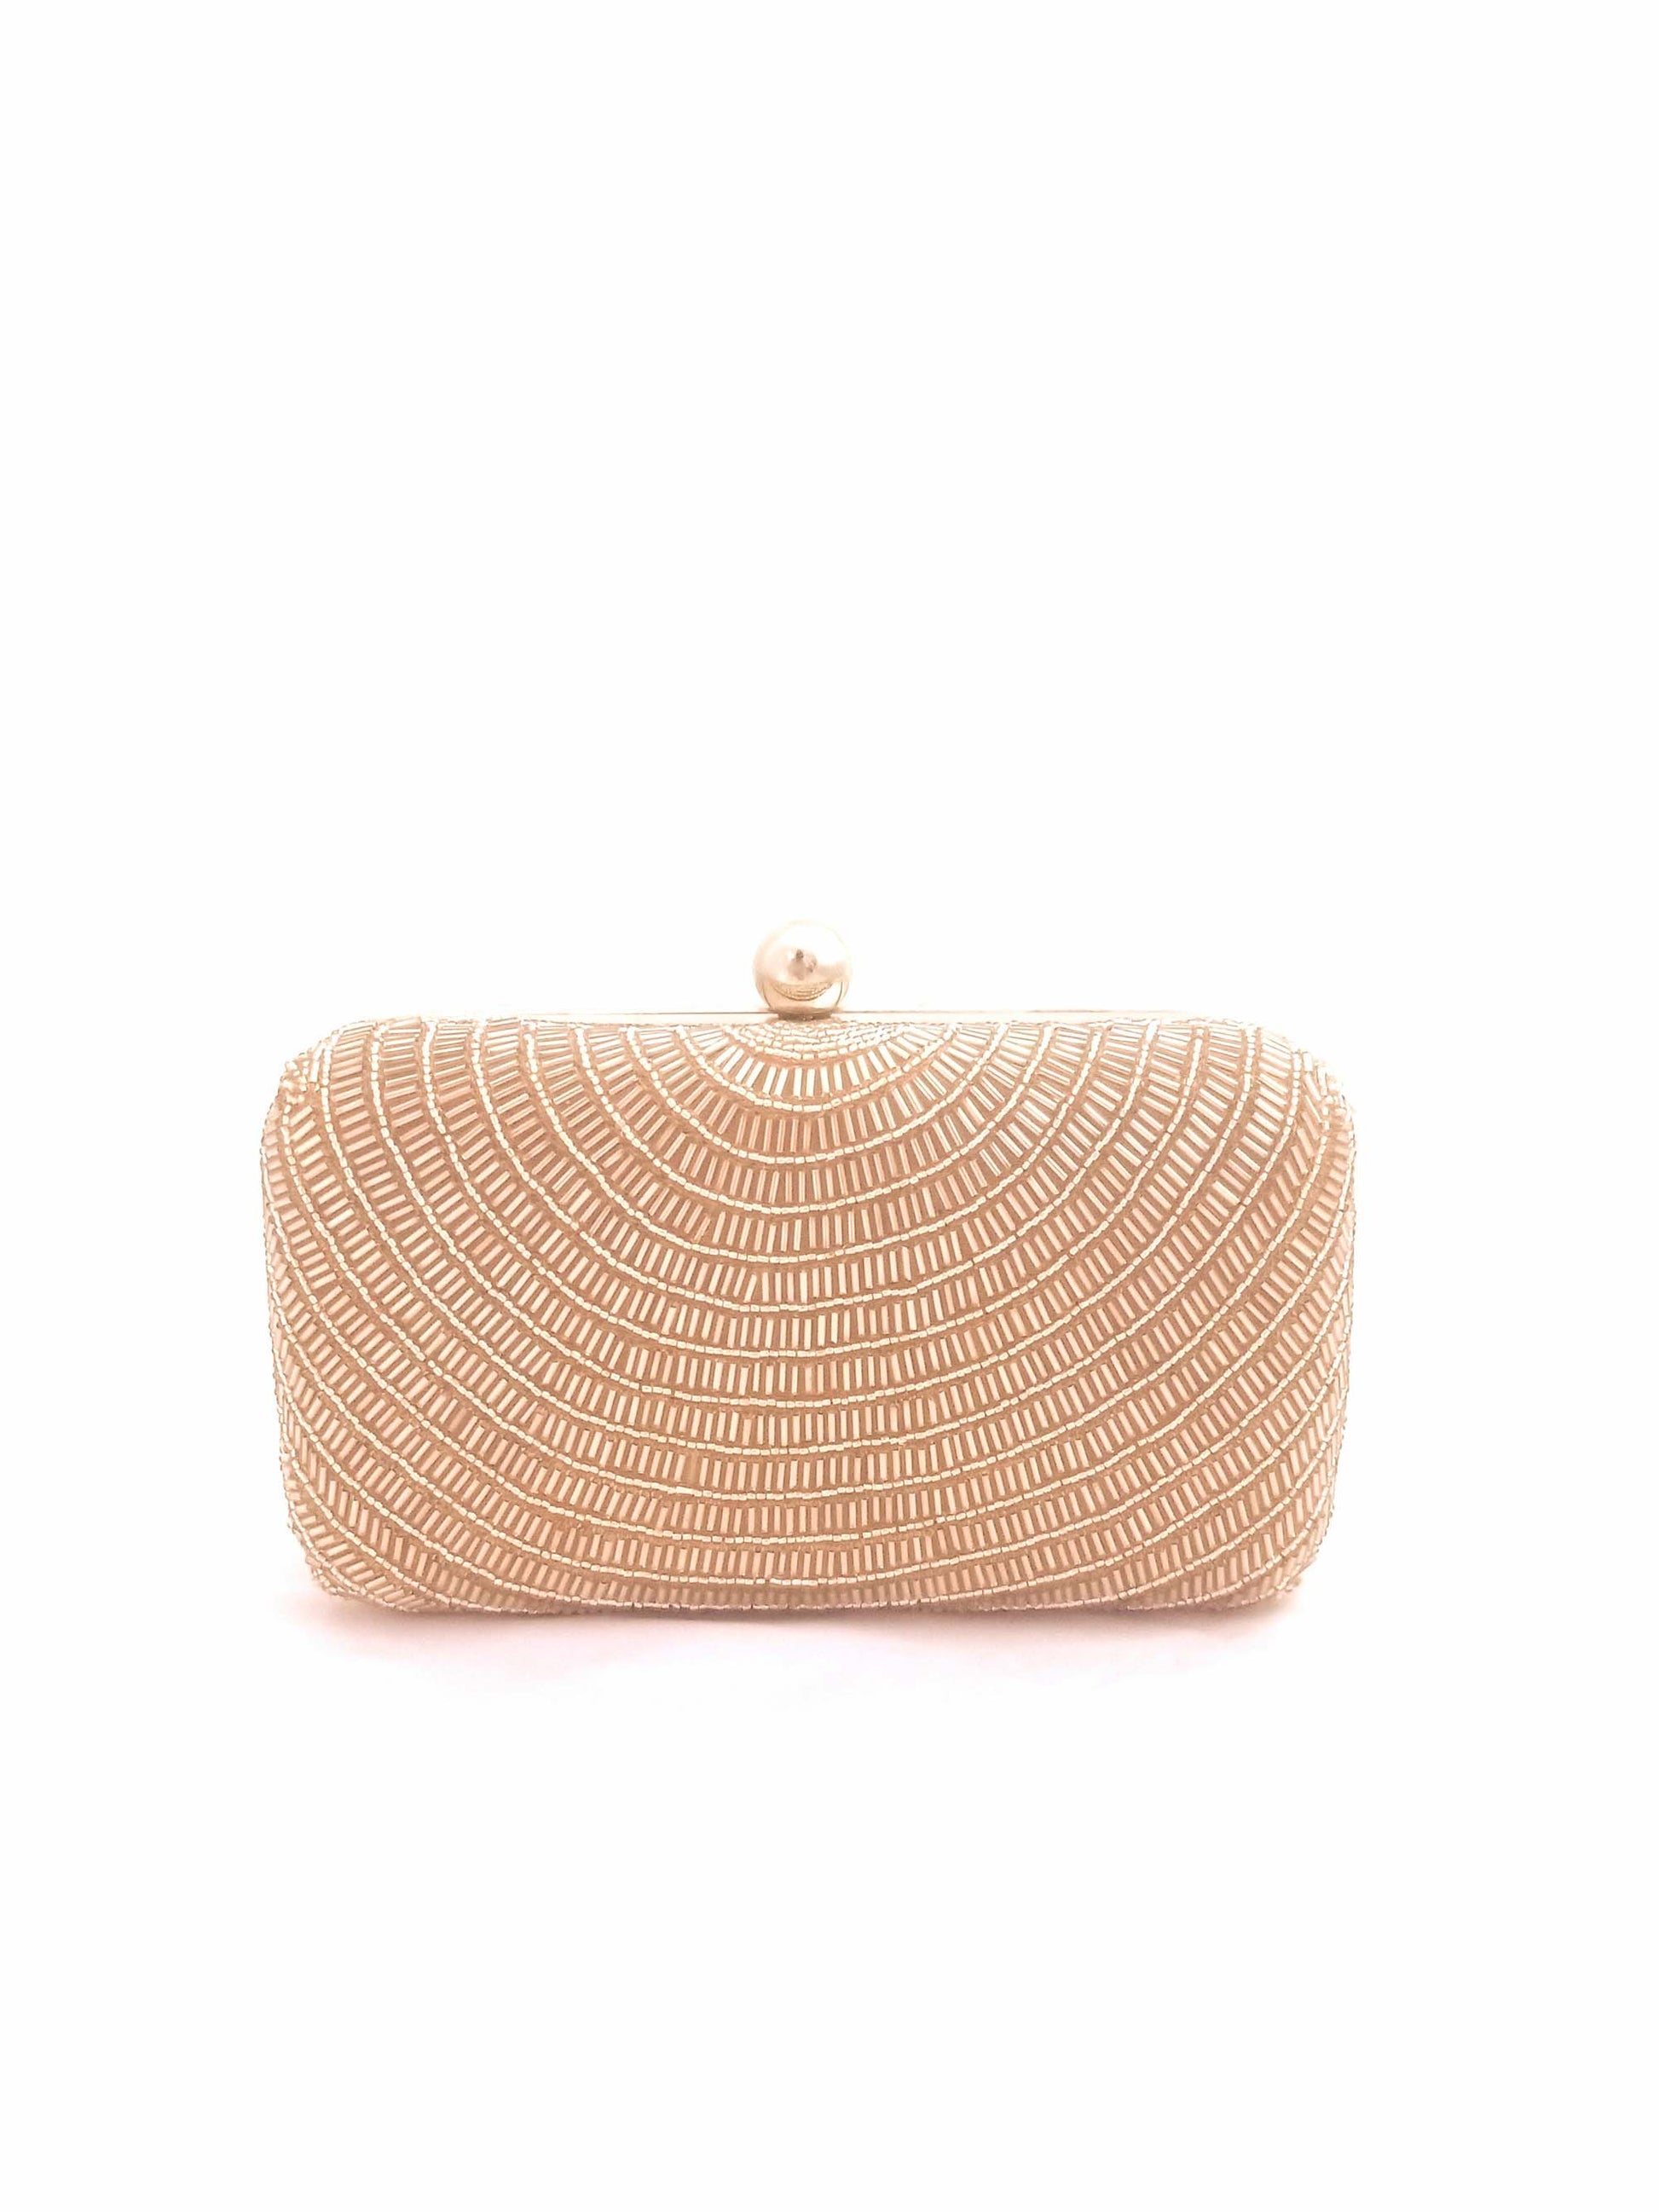 Gold Beaded Hand Embroidered Clutch with a long Sling Chain